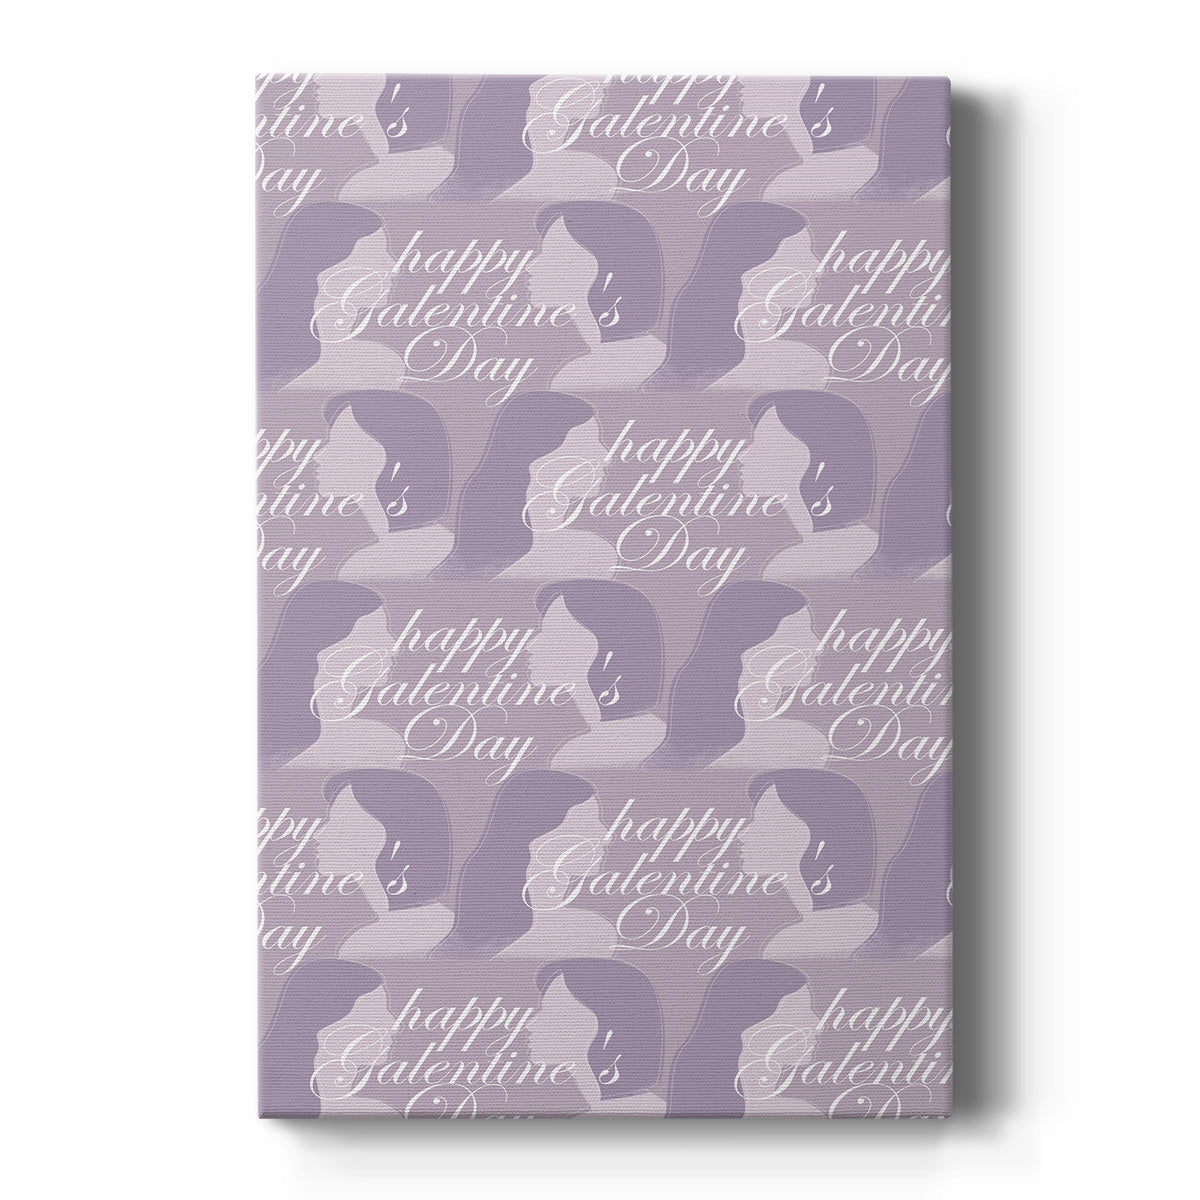 Happy Galentine's Day Collection E Premium Gallery Wrapped Canvas - Ready to Hang